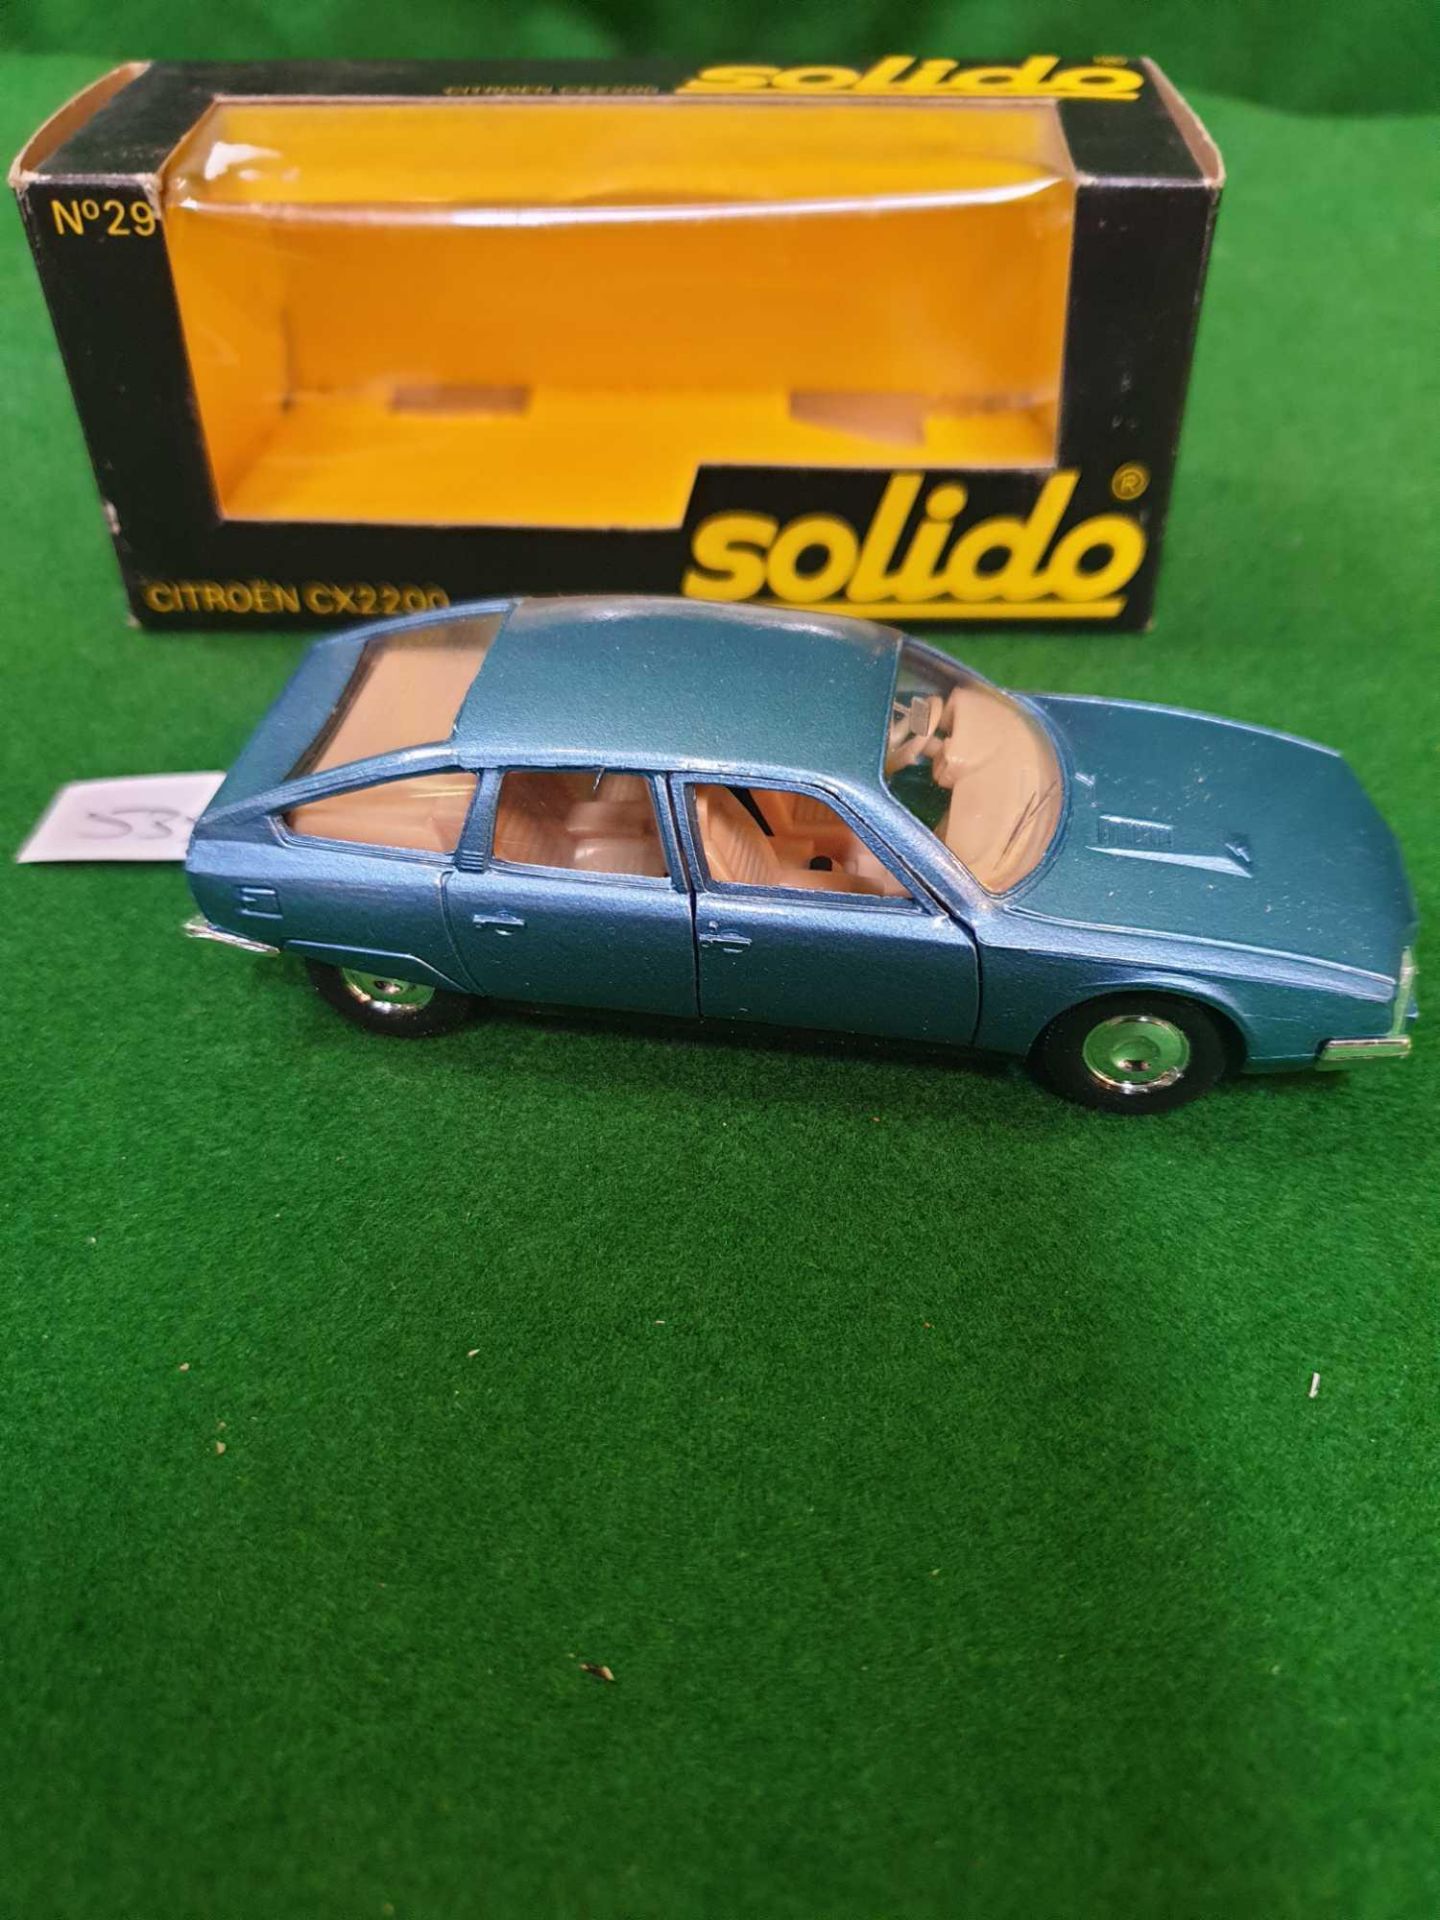 Solido #29 Citroen CX2200 Metallic Blue Virtually Mint To Mint Model In A Good Box - Image 3 of 4